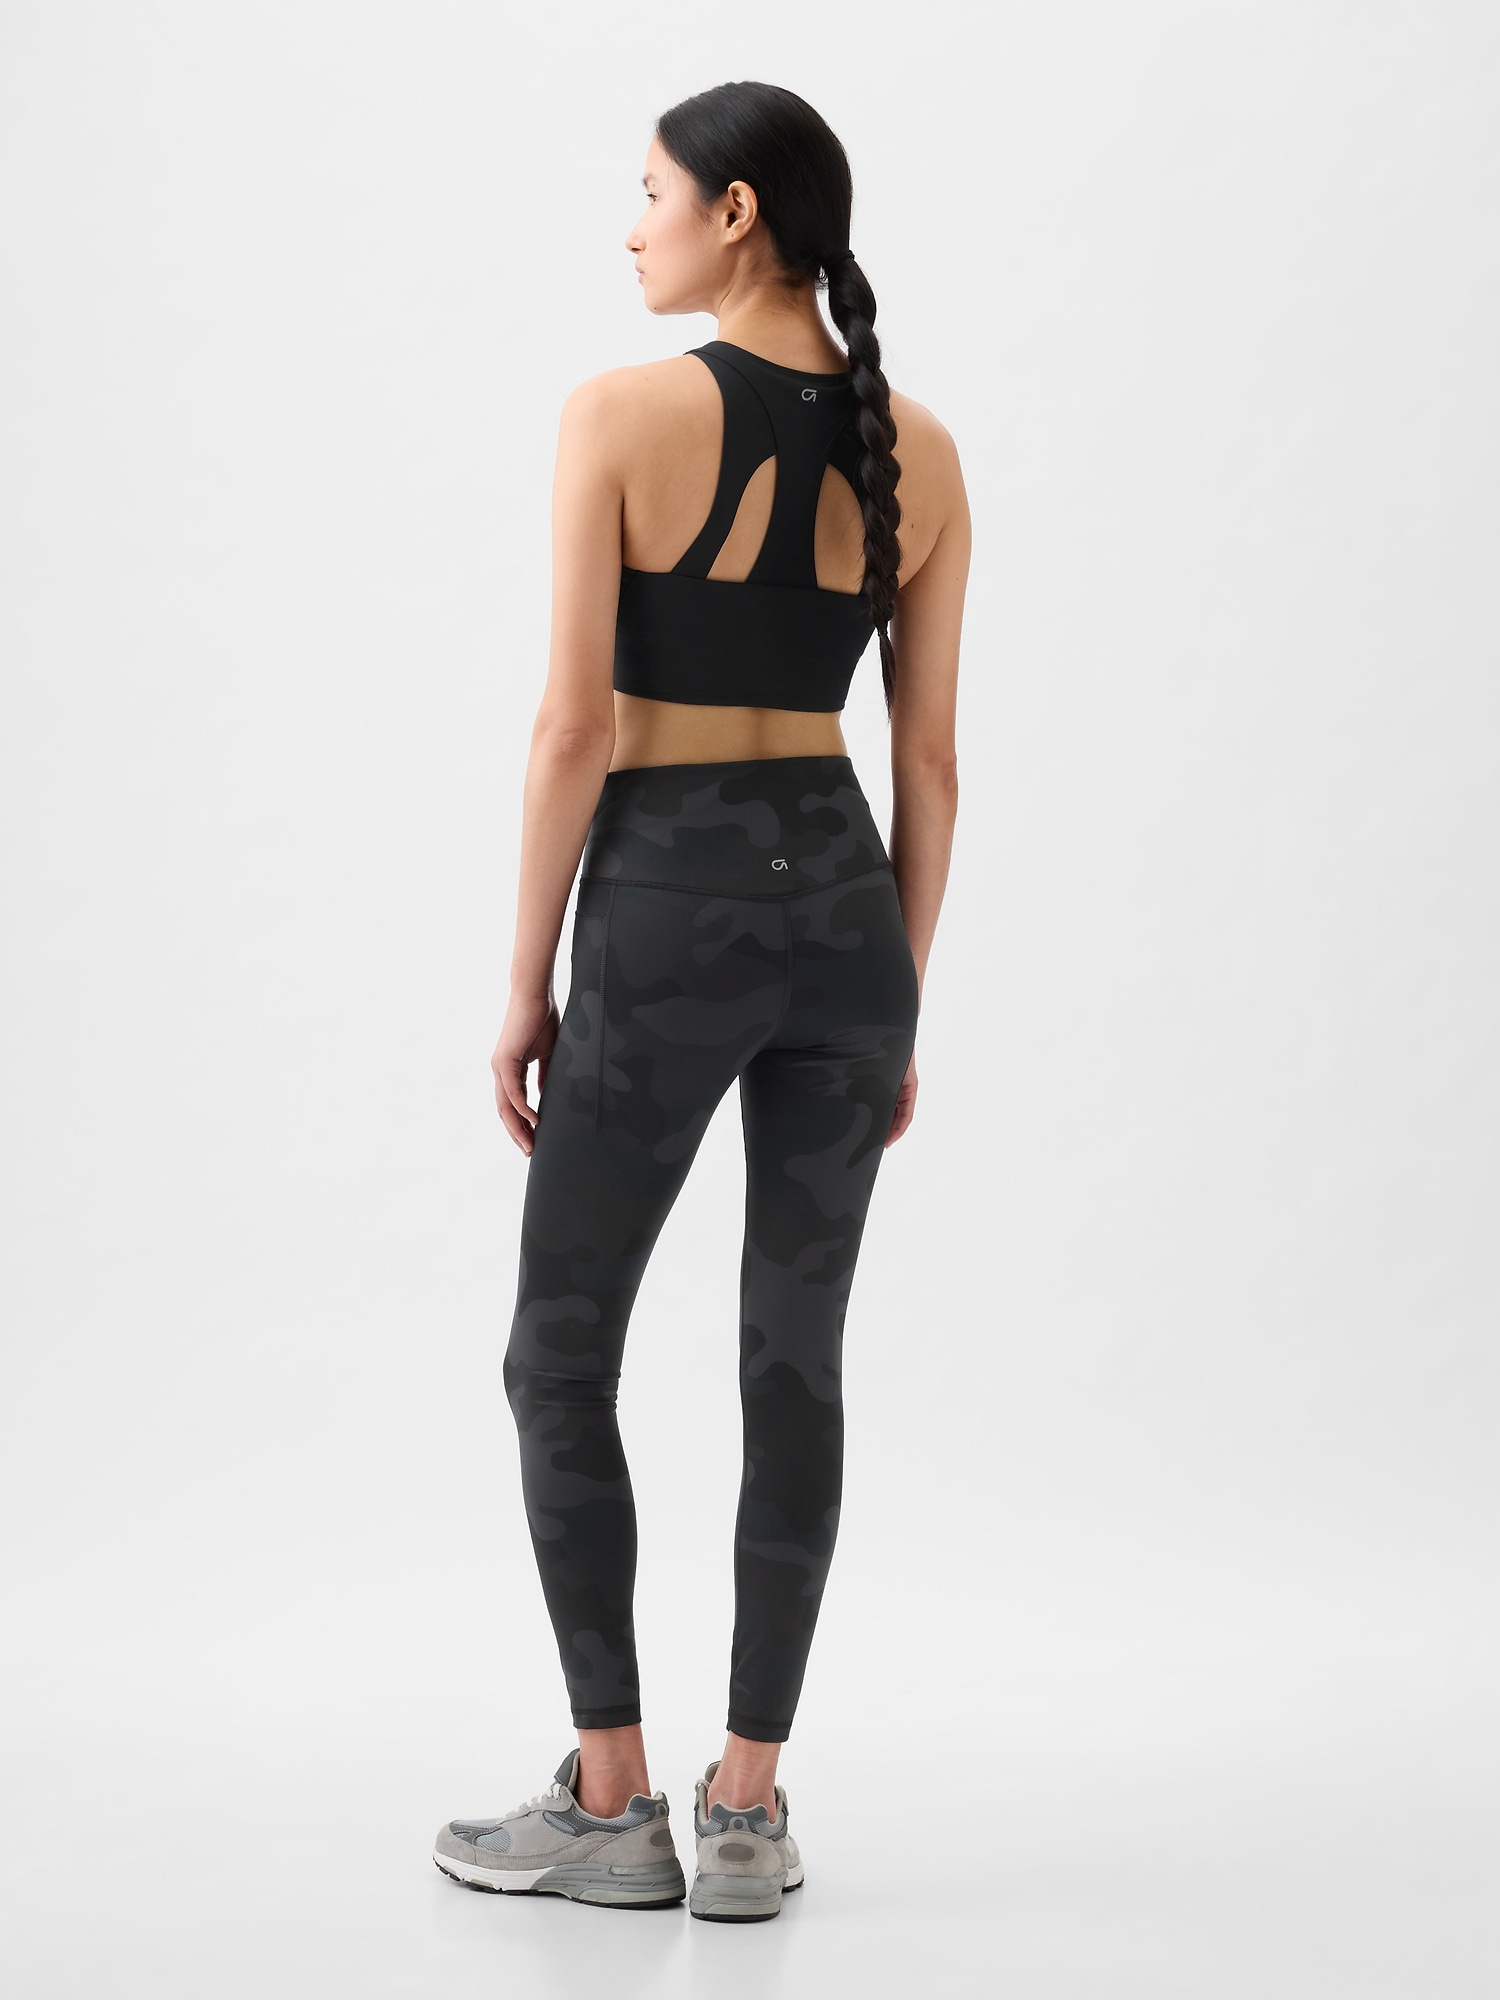 AT Balance High-Rise Leggings for Tall Women in Grey Camo